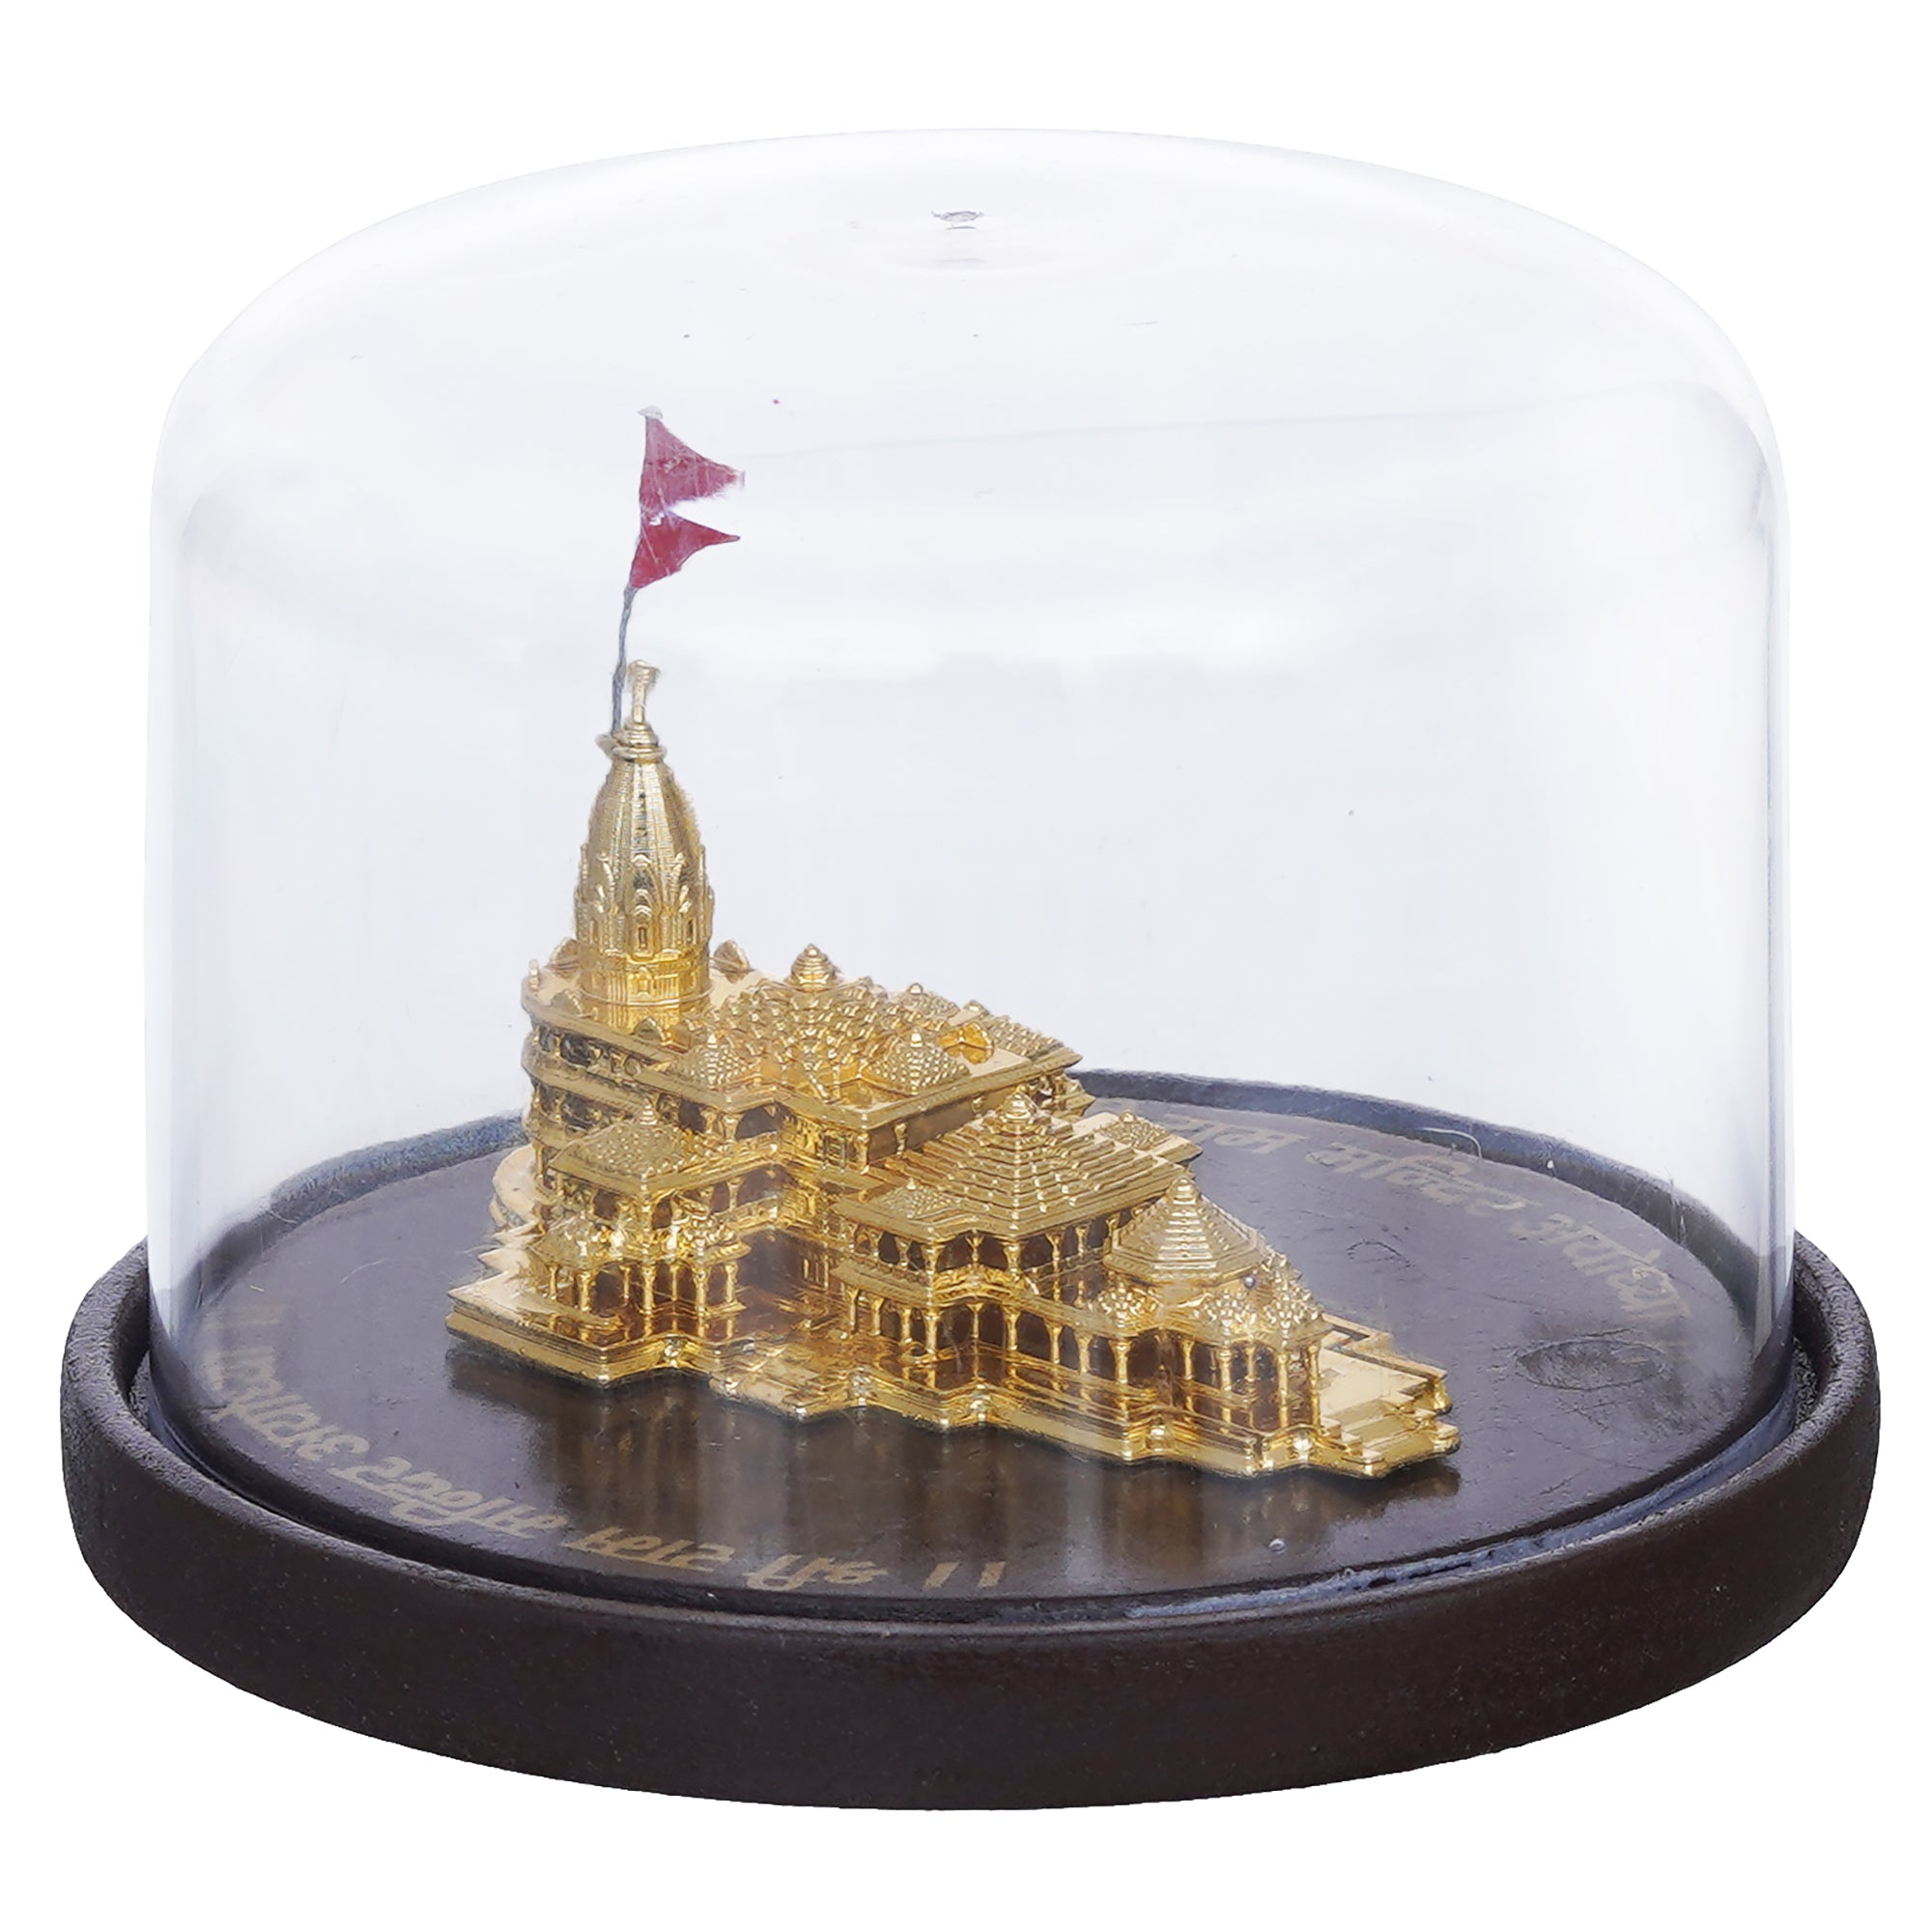 eCraftIndia Golden Shri Ram Mandir Ayodhya Model Authentic Designer Temple Covered by a Glass Dome - Perfect for Home Decor, and Spiritual Gifting 2